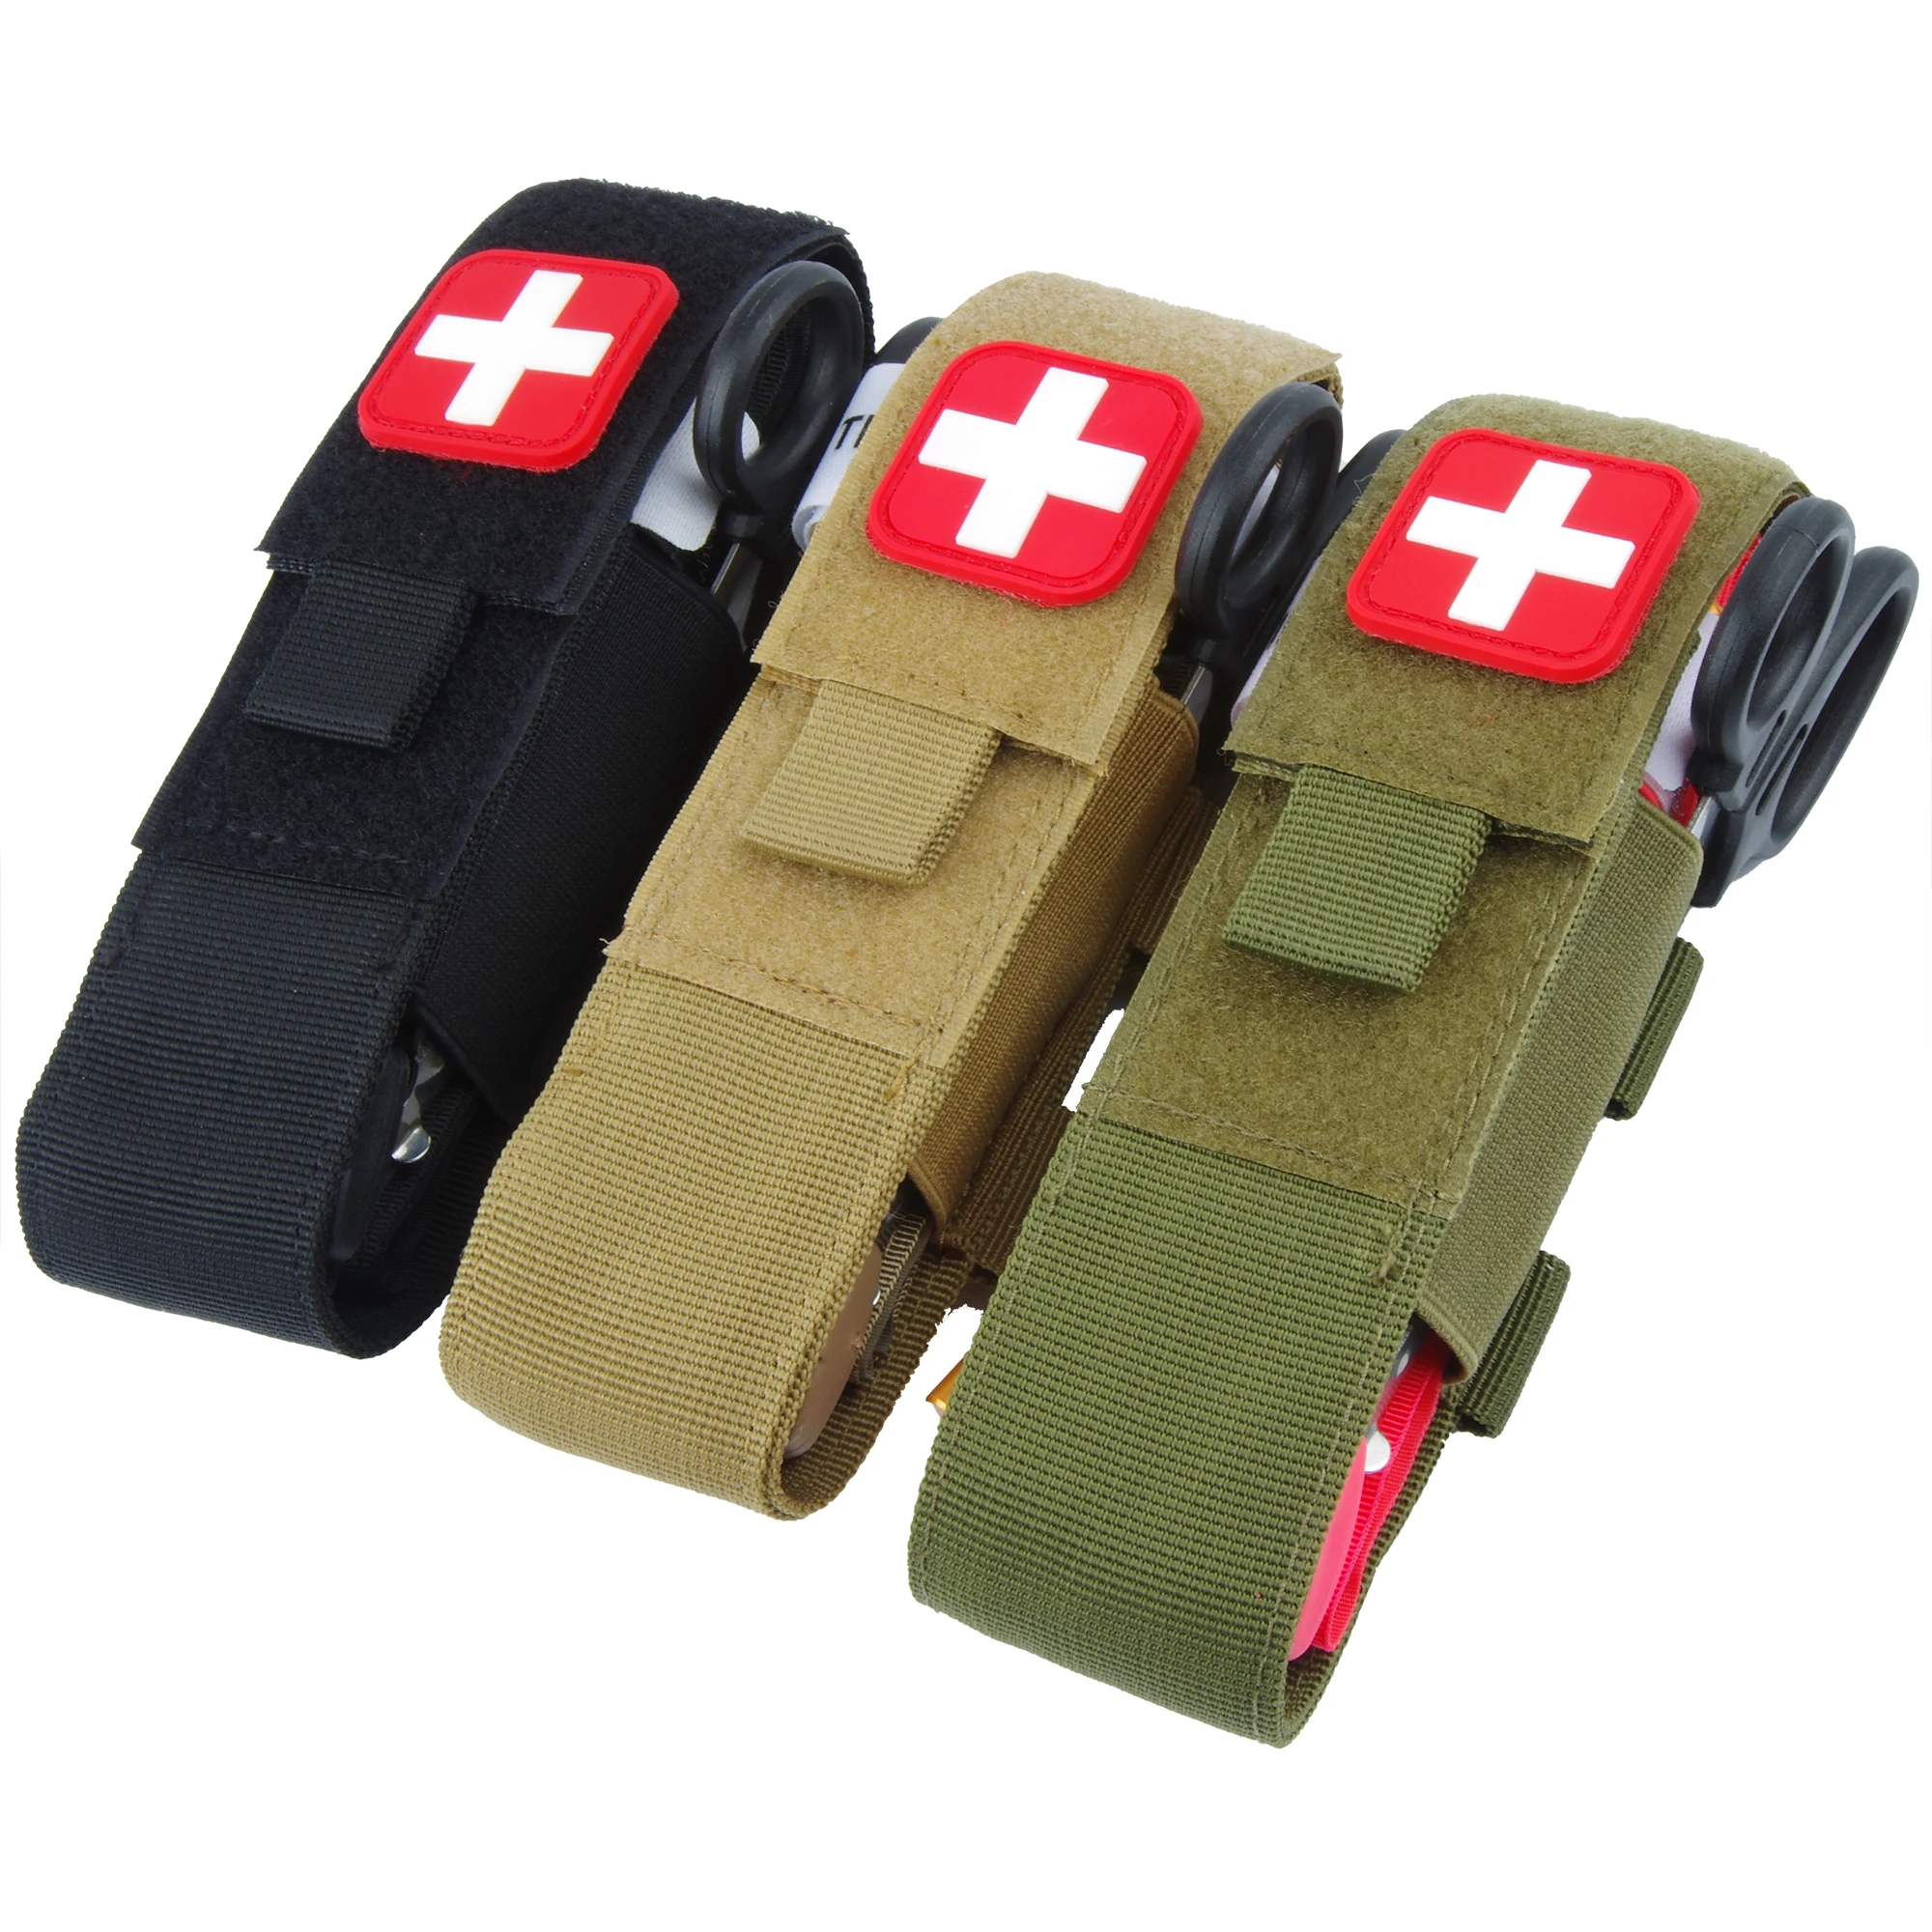 Uminum rod operation spinning military supplies tactical emergency rescue life survival thumb200